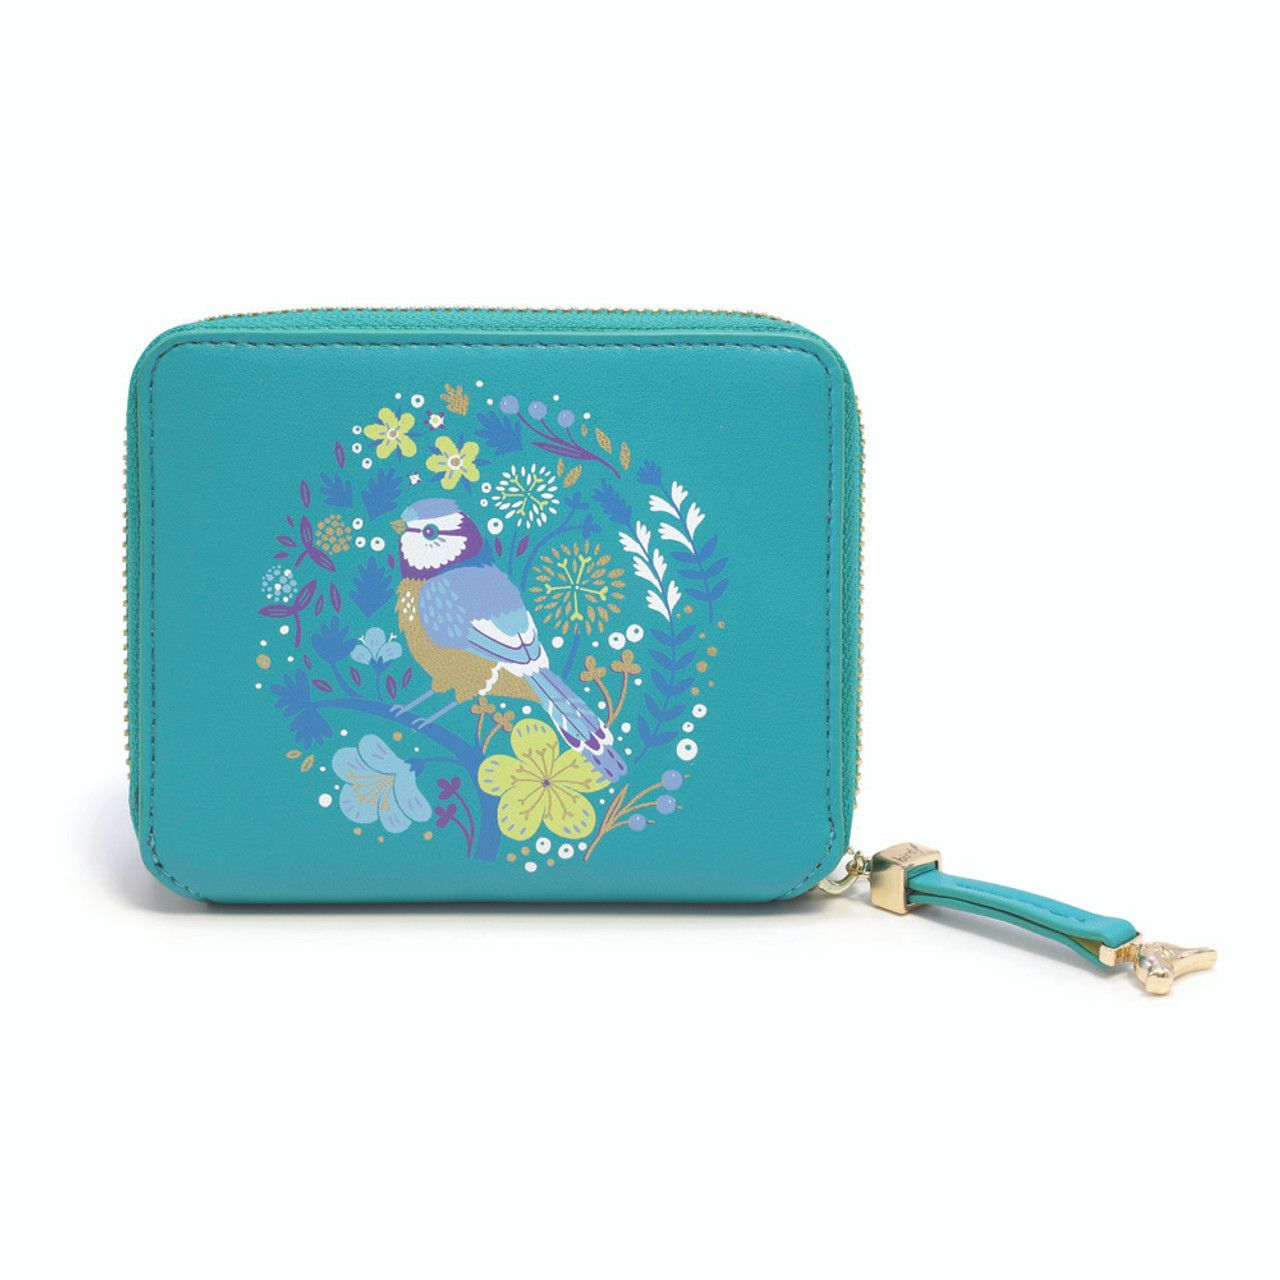 Tipperary Crystal Blue Tit Birdy Wallet  Our brightly coloured Birdy wallets are a perfectly compact ladies wallet. Designed to bring a splash of colour into your life! RFID blocking wallet, designed to block RFID readers from scanning your credit cards.